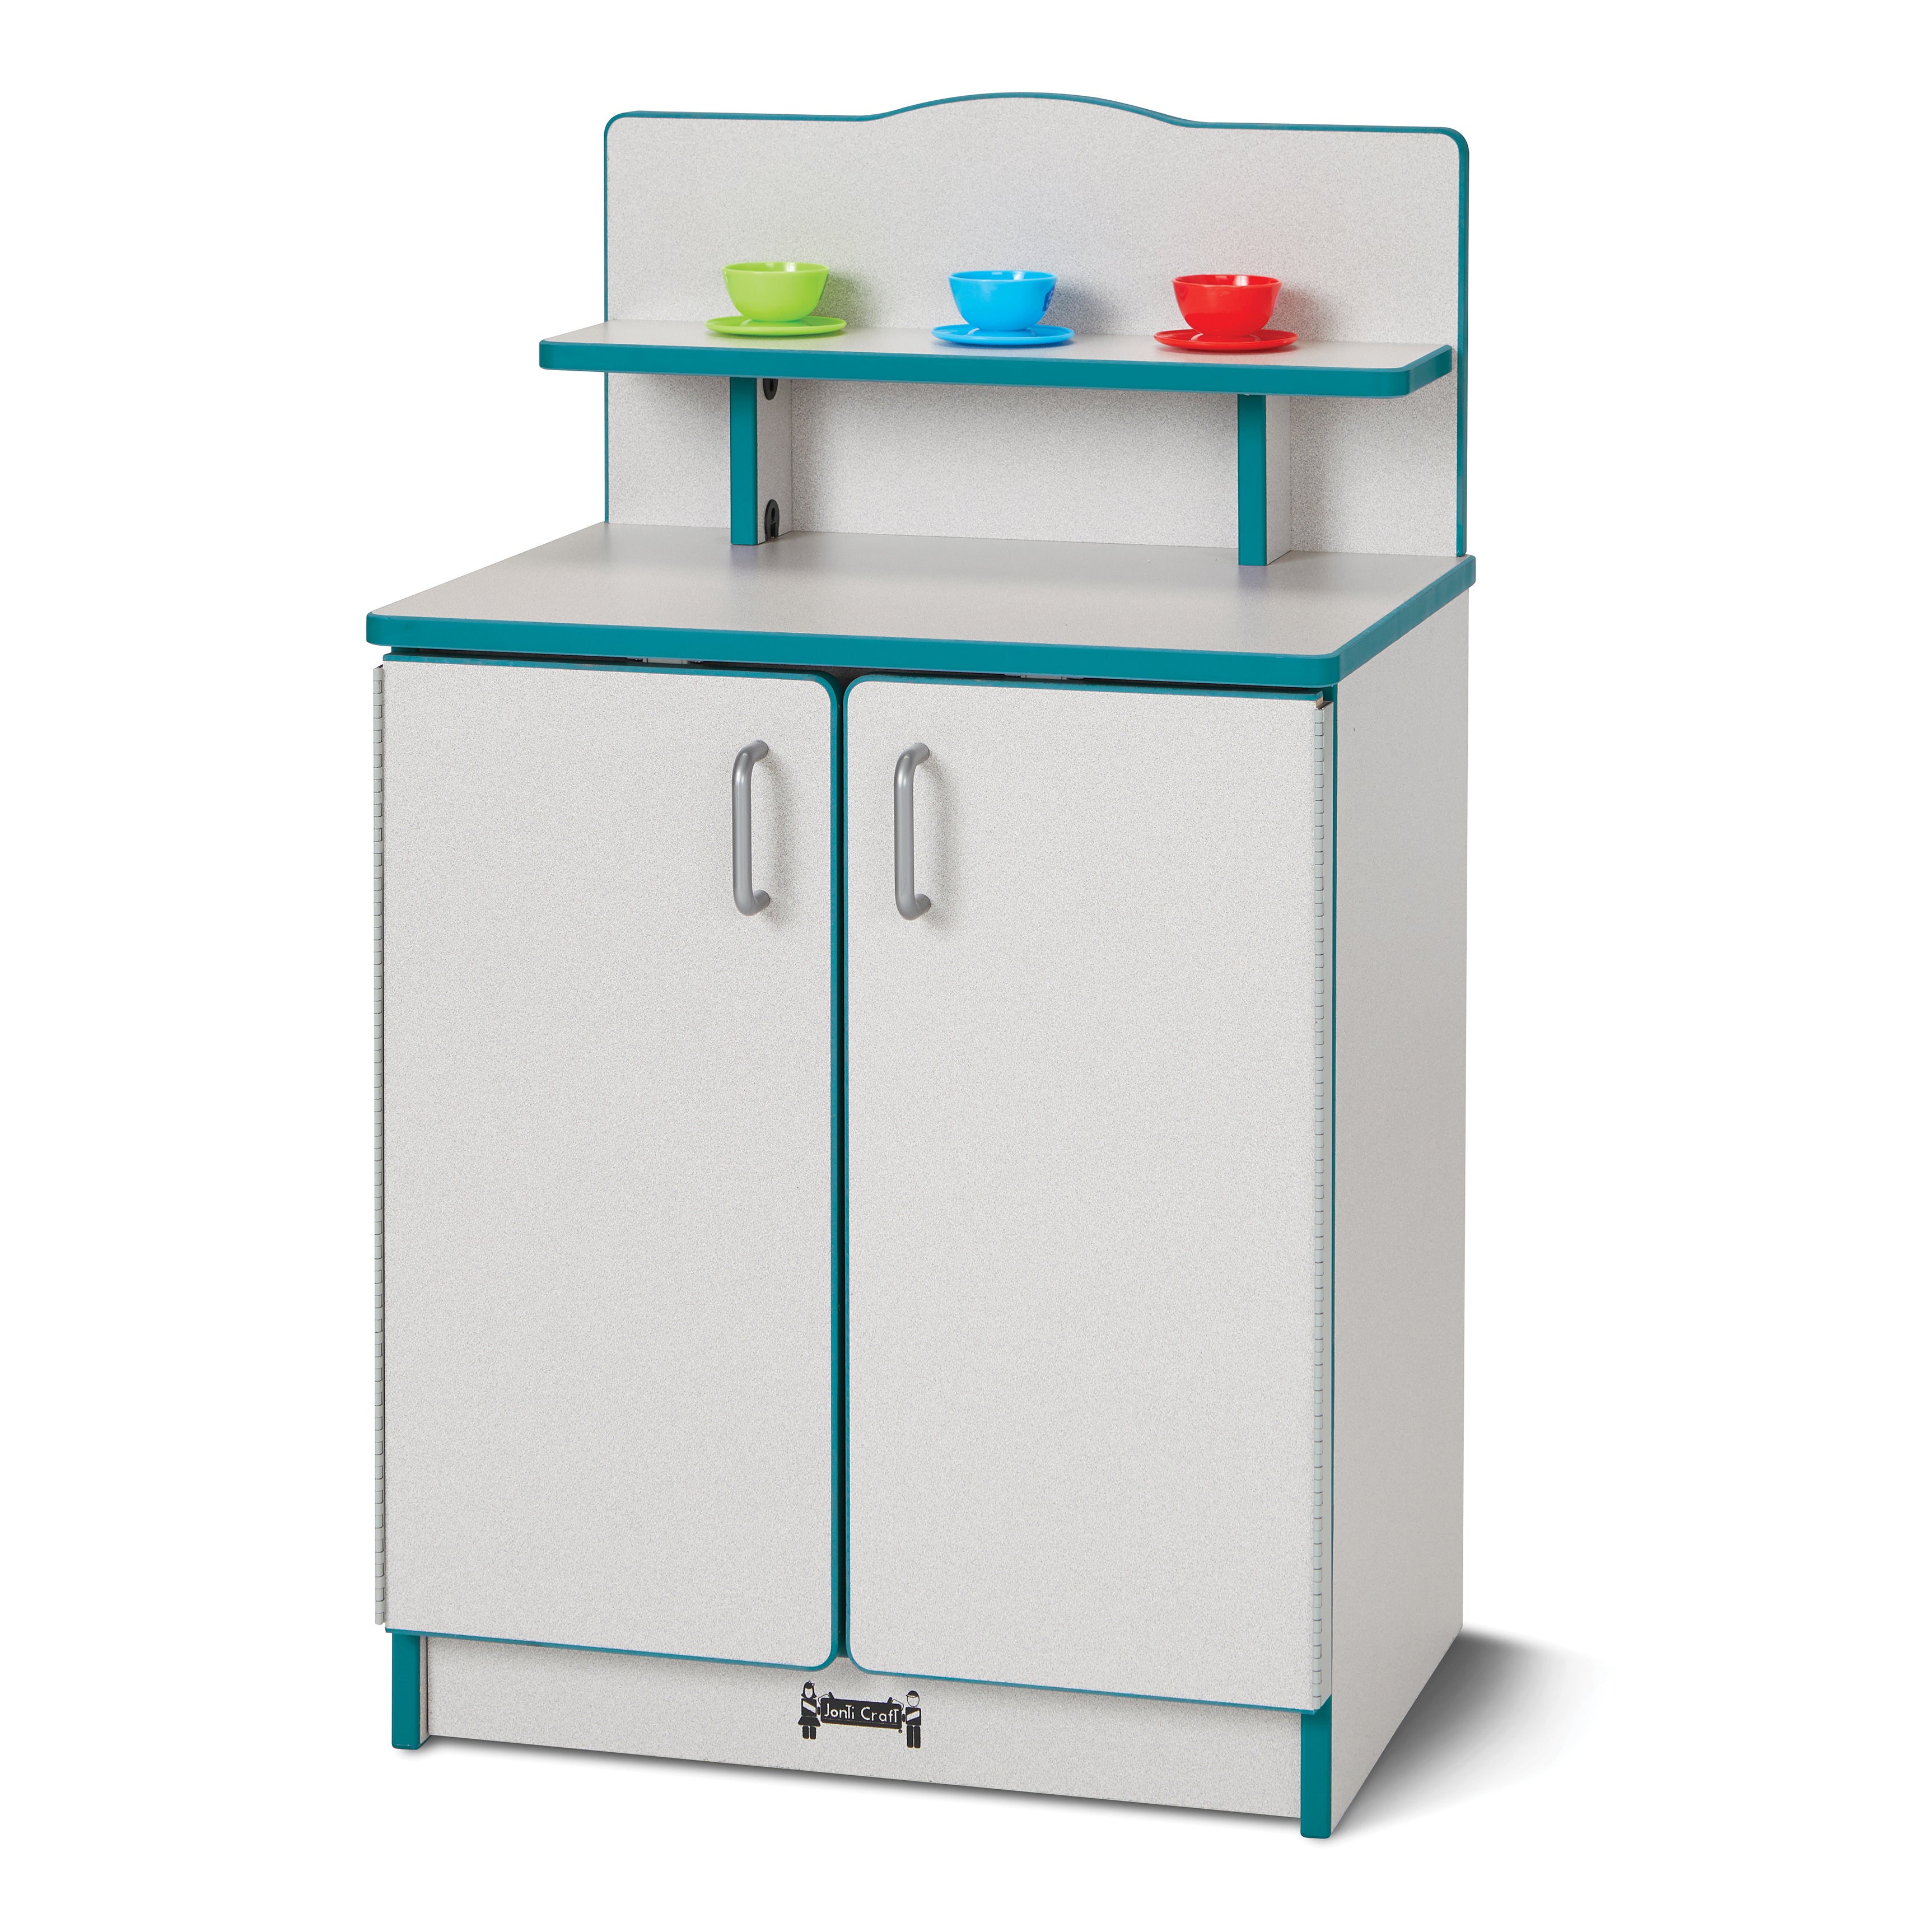 2407JCWW005, Rainbow Accents Culinary Creations Kitchen Cupboard - Teal